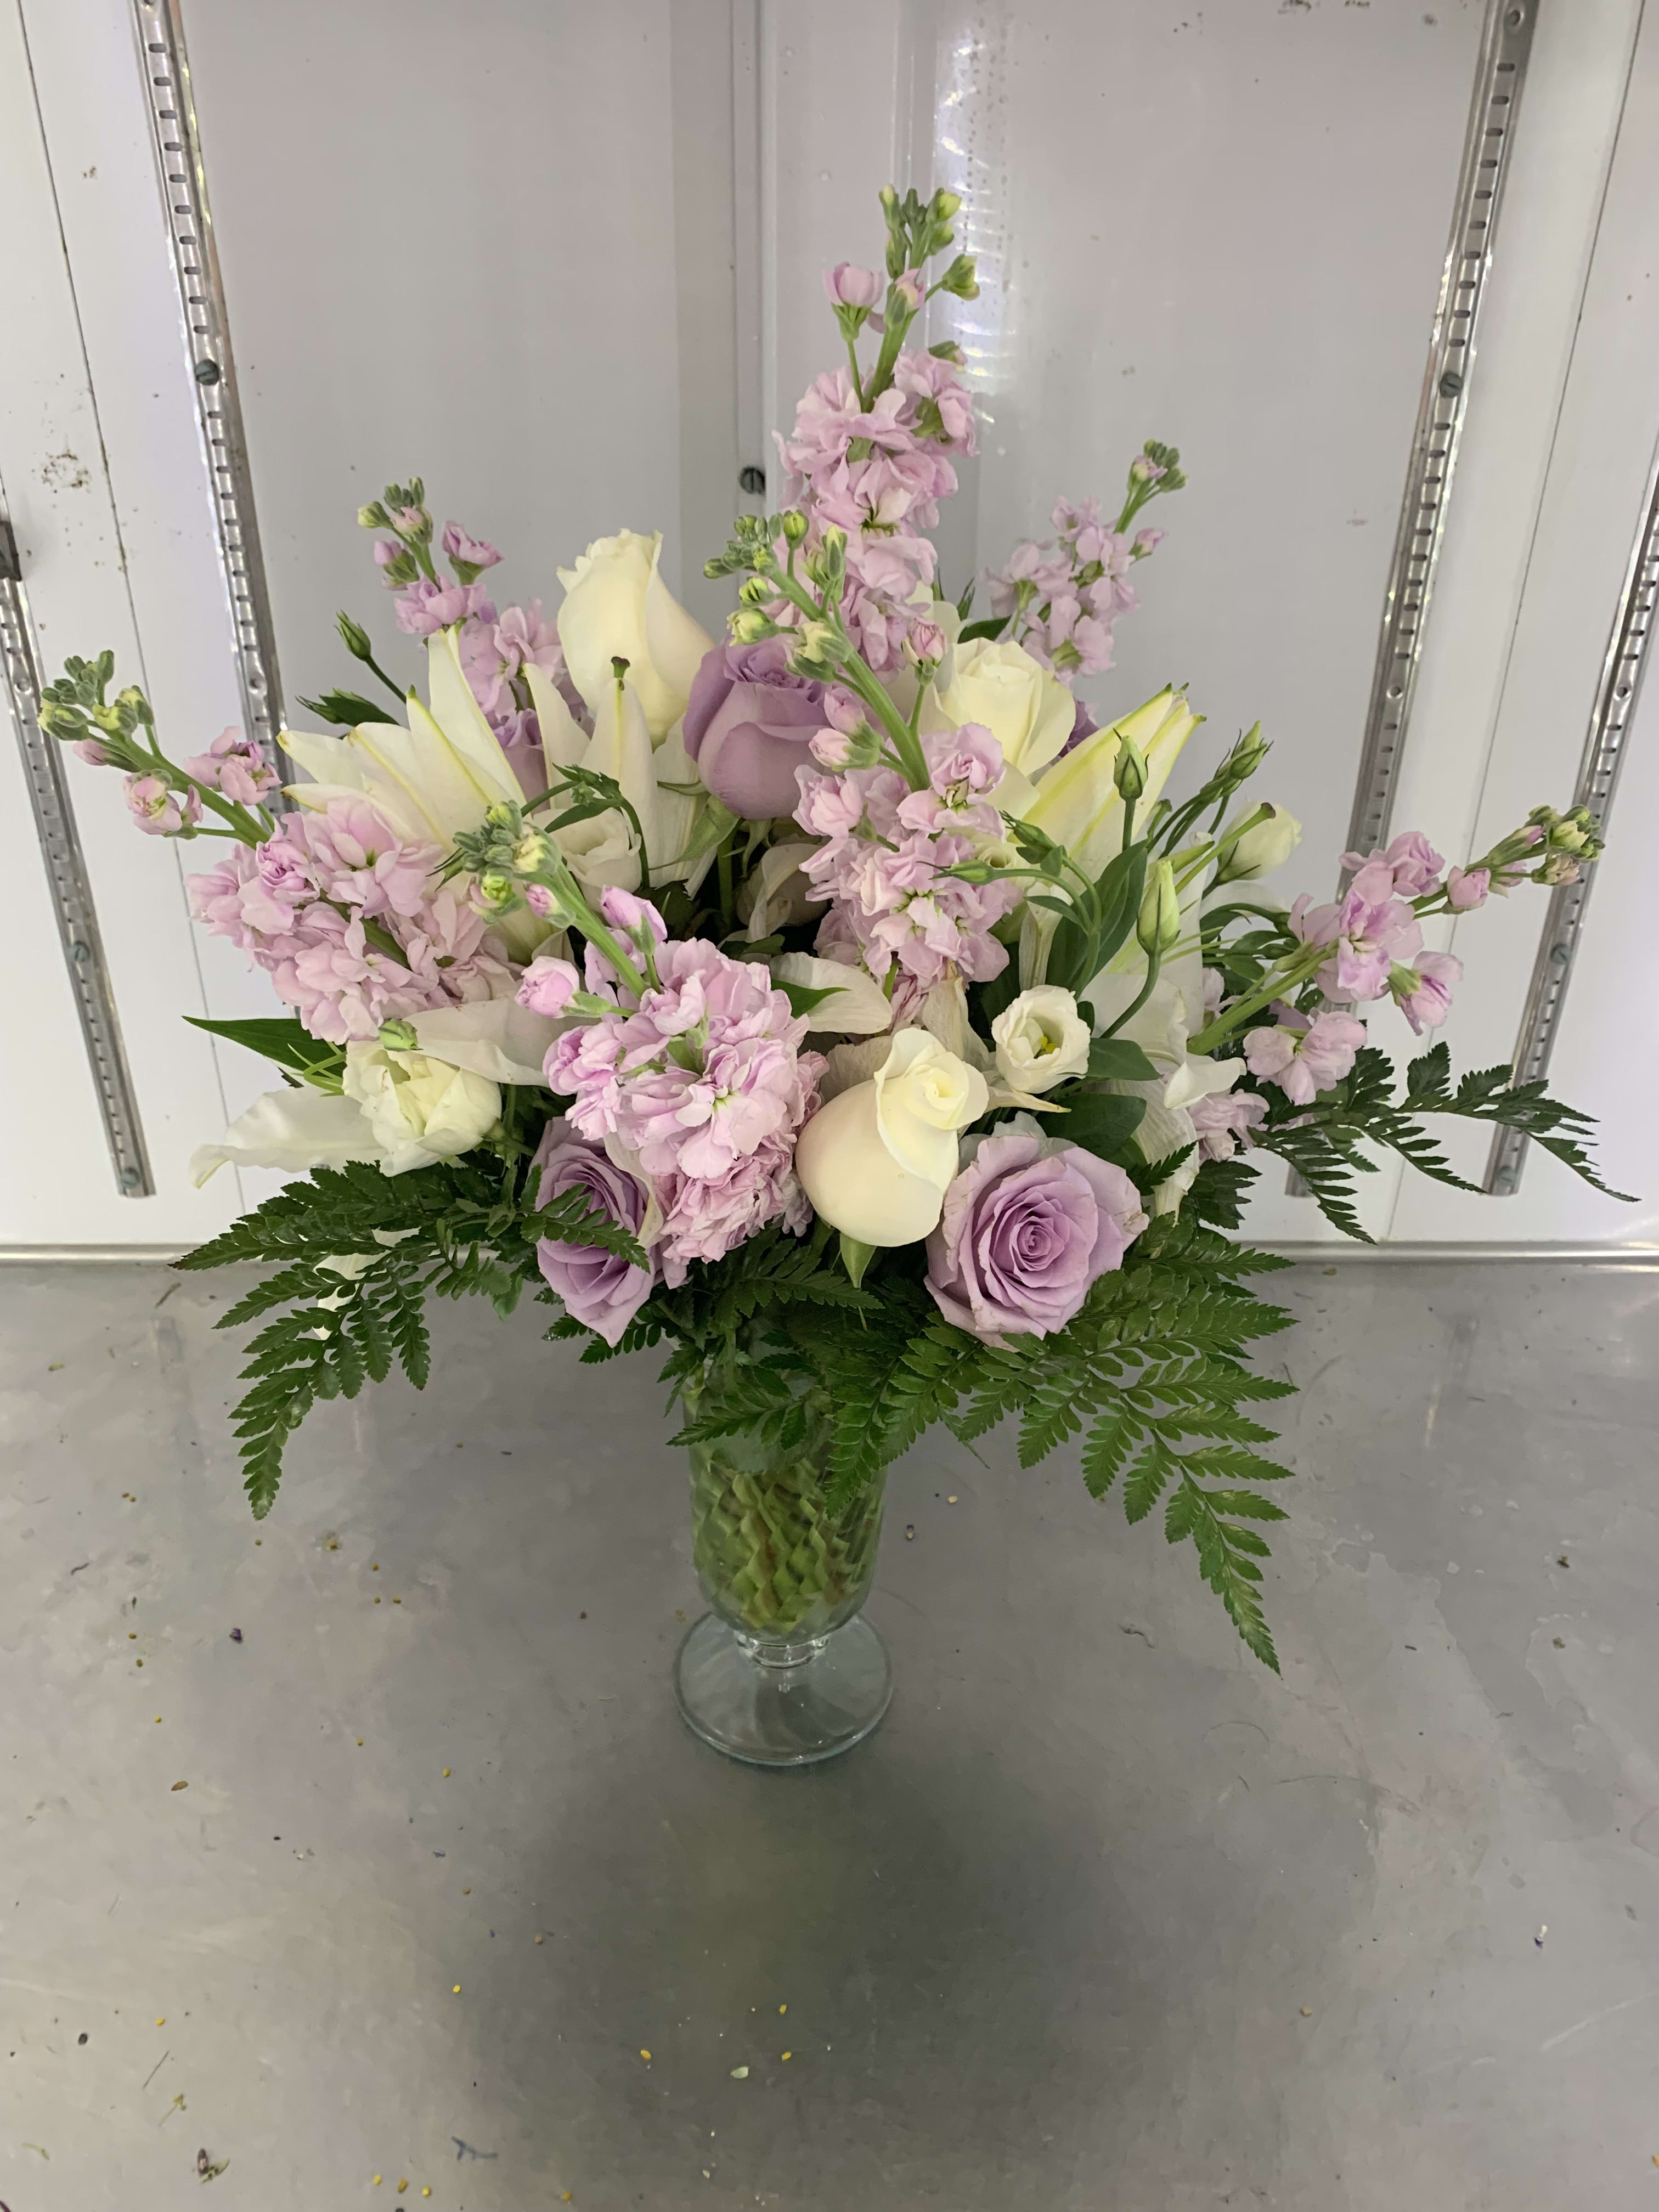 ANN'S LAVENDER DREAM - 6 WHITE ROSES 10 LAVENDER ROSES 3 WHITE LILIES 6 PINK STOCK 5 WHITE LISIANTHUS AND LEATHER